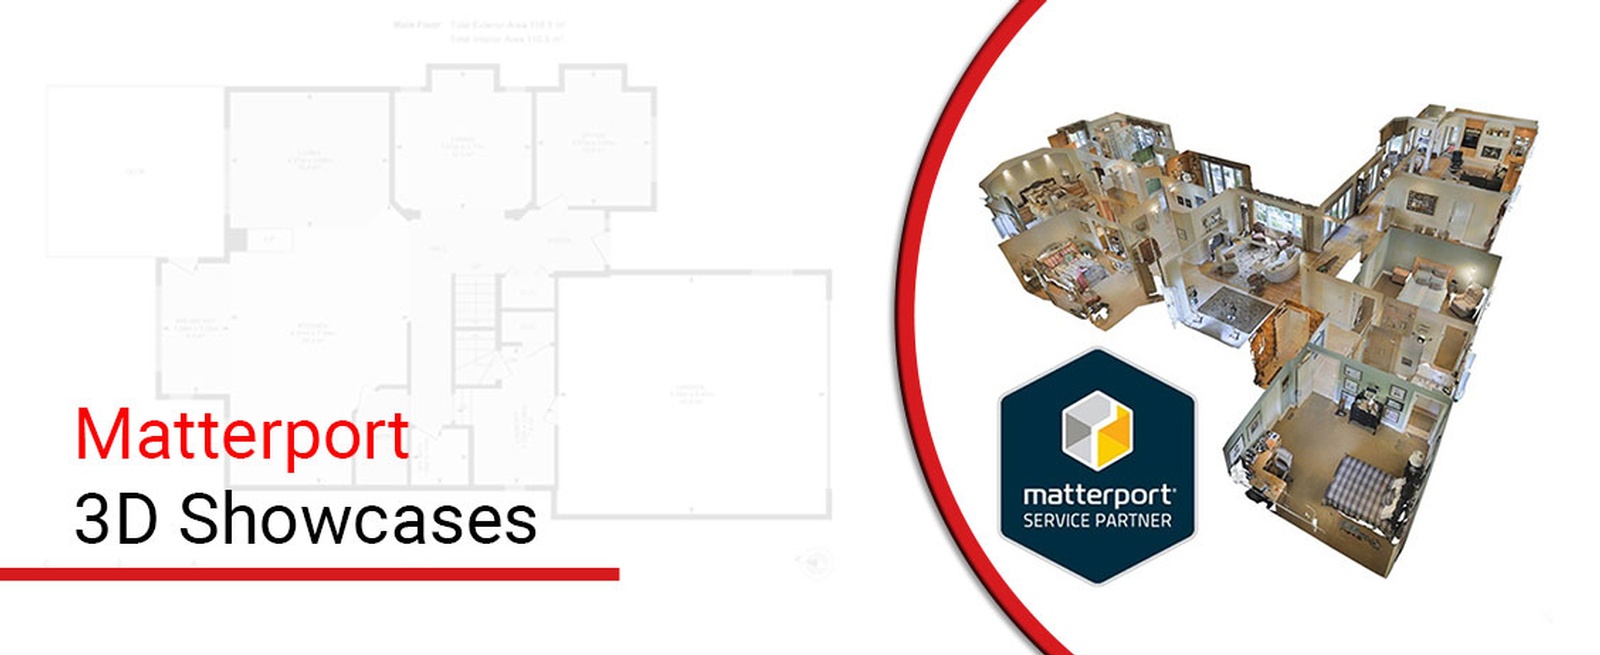 Matterport 3D Showcases by Square Feet Photography and Floor Plans